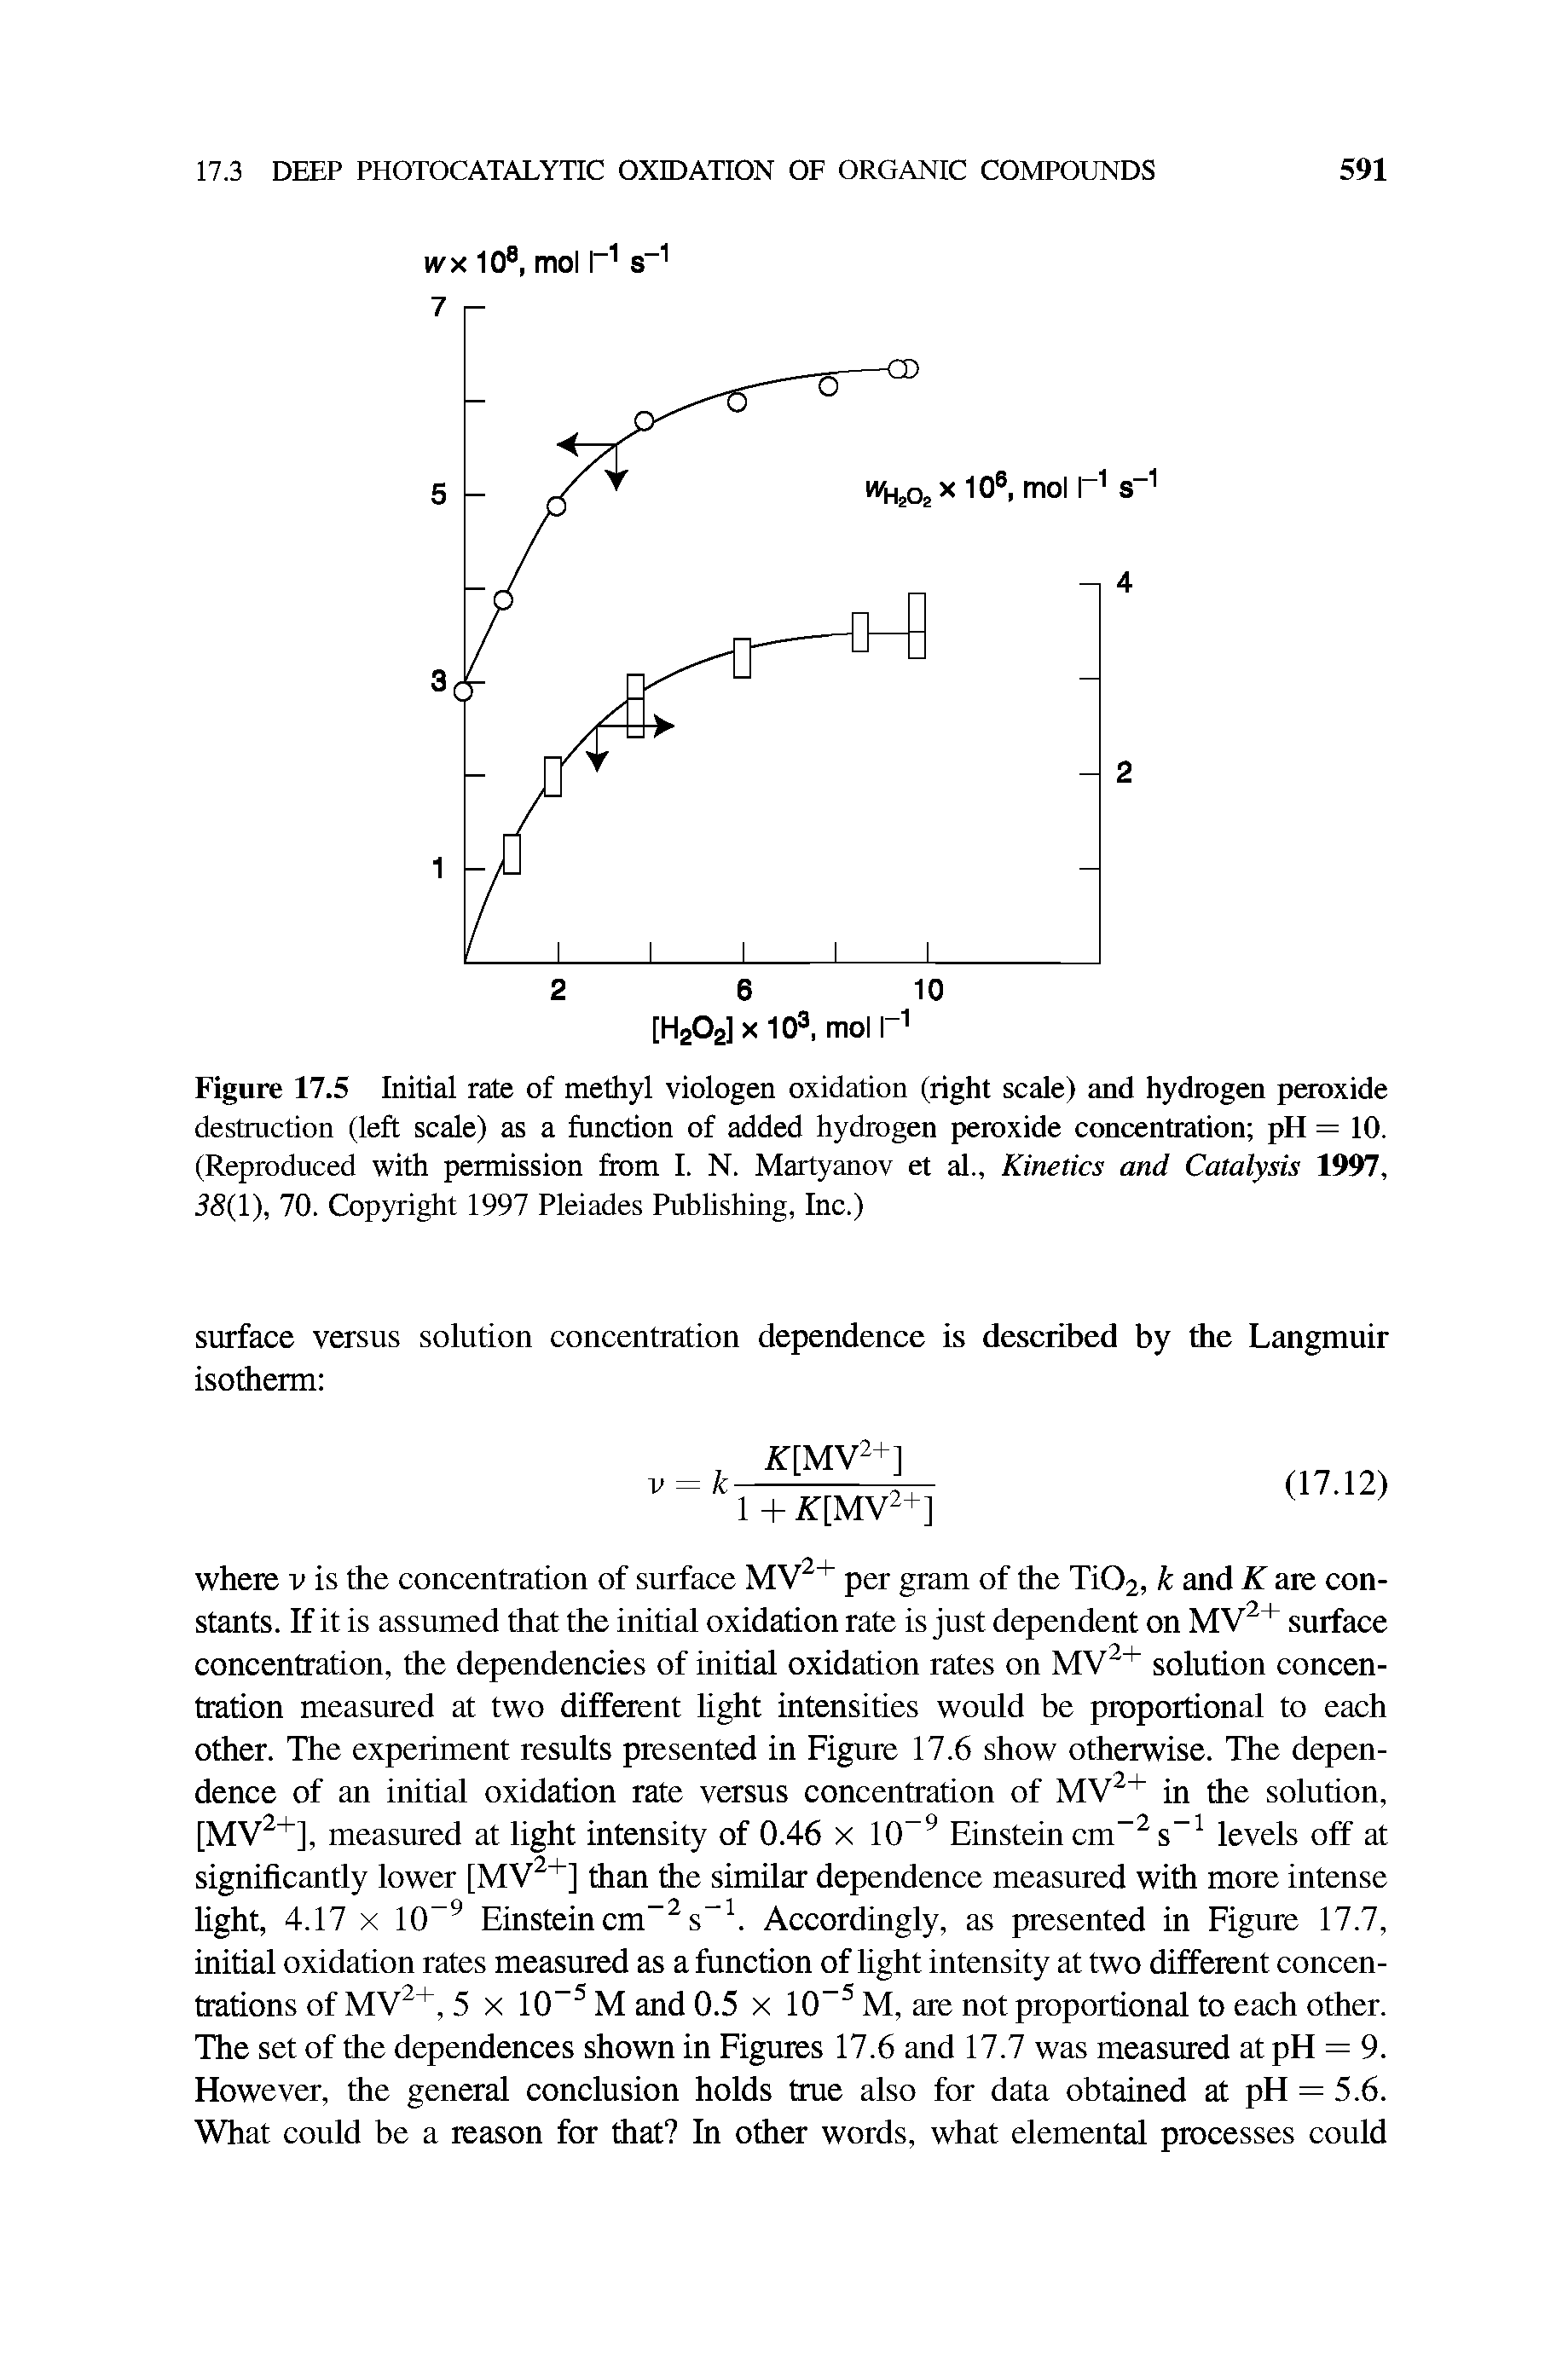 Figure 17.5 Initial rate of methyl viologen oxidation (right scale) and hydrogen peroxide destruction (left scale) as a function of added hydrogen peroxide concentration pH = 10. (Reproduced with permission from I. N. Martyanov et al.. Kinetics and Catalysis 1997, 5S(1), 70. Copyright 1997 Pleiades Publishing, Inc.)...